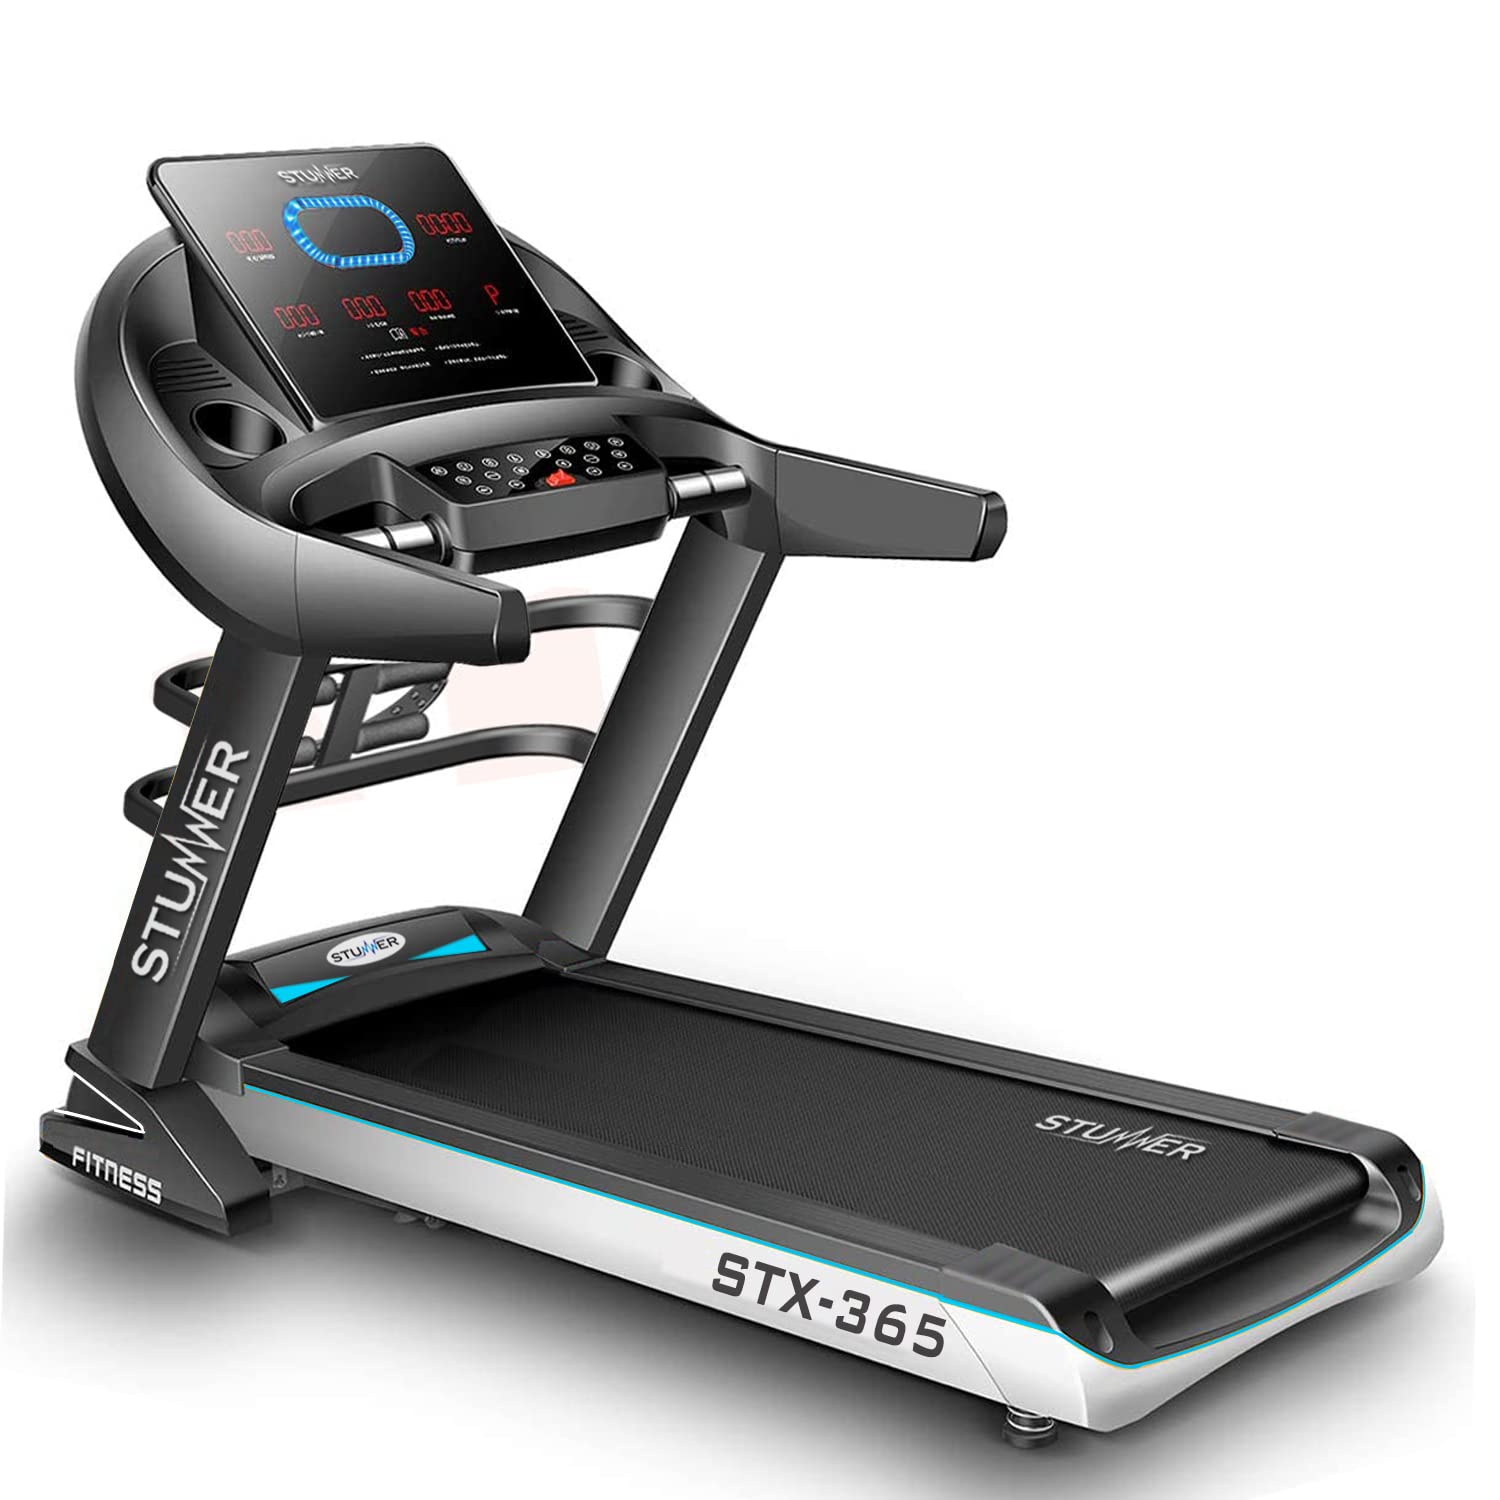 best treadmill with 150 kg user weight in India if you have budget under 70,000